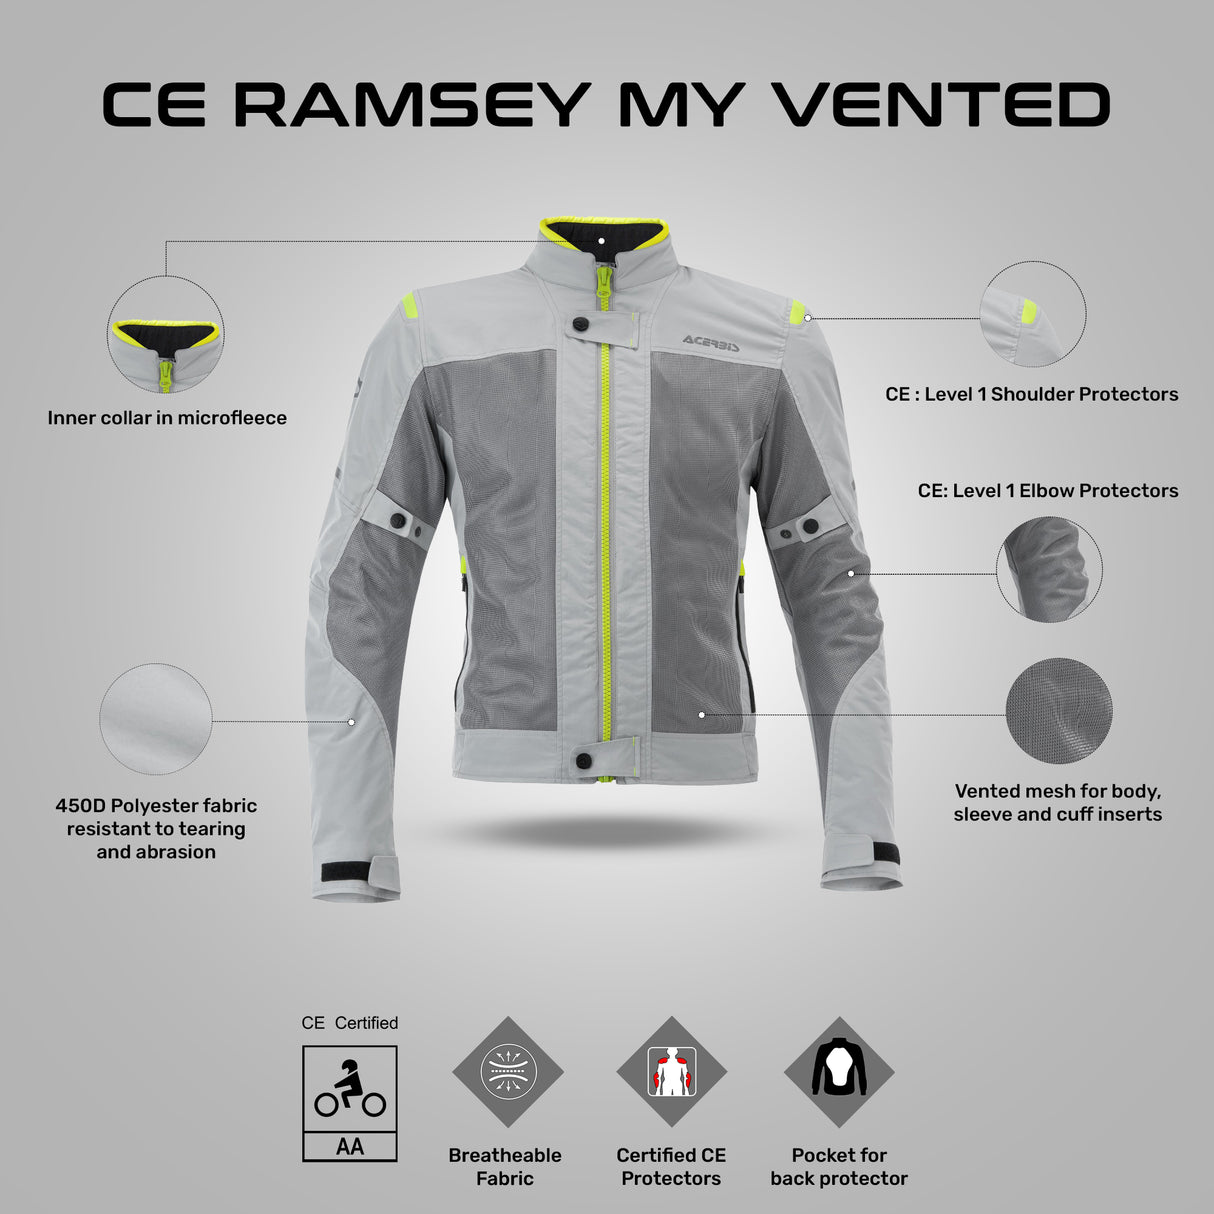 RAMSEY MY VENTED JACKET